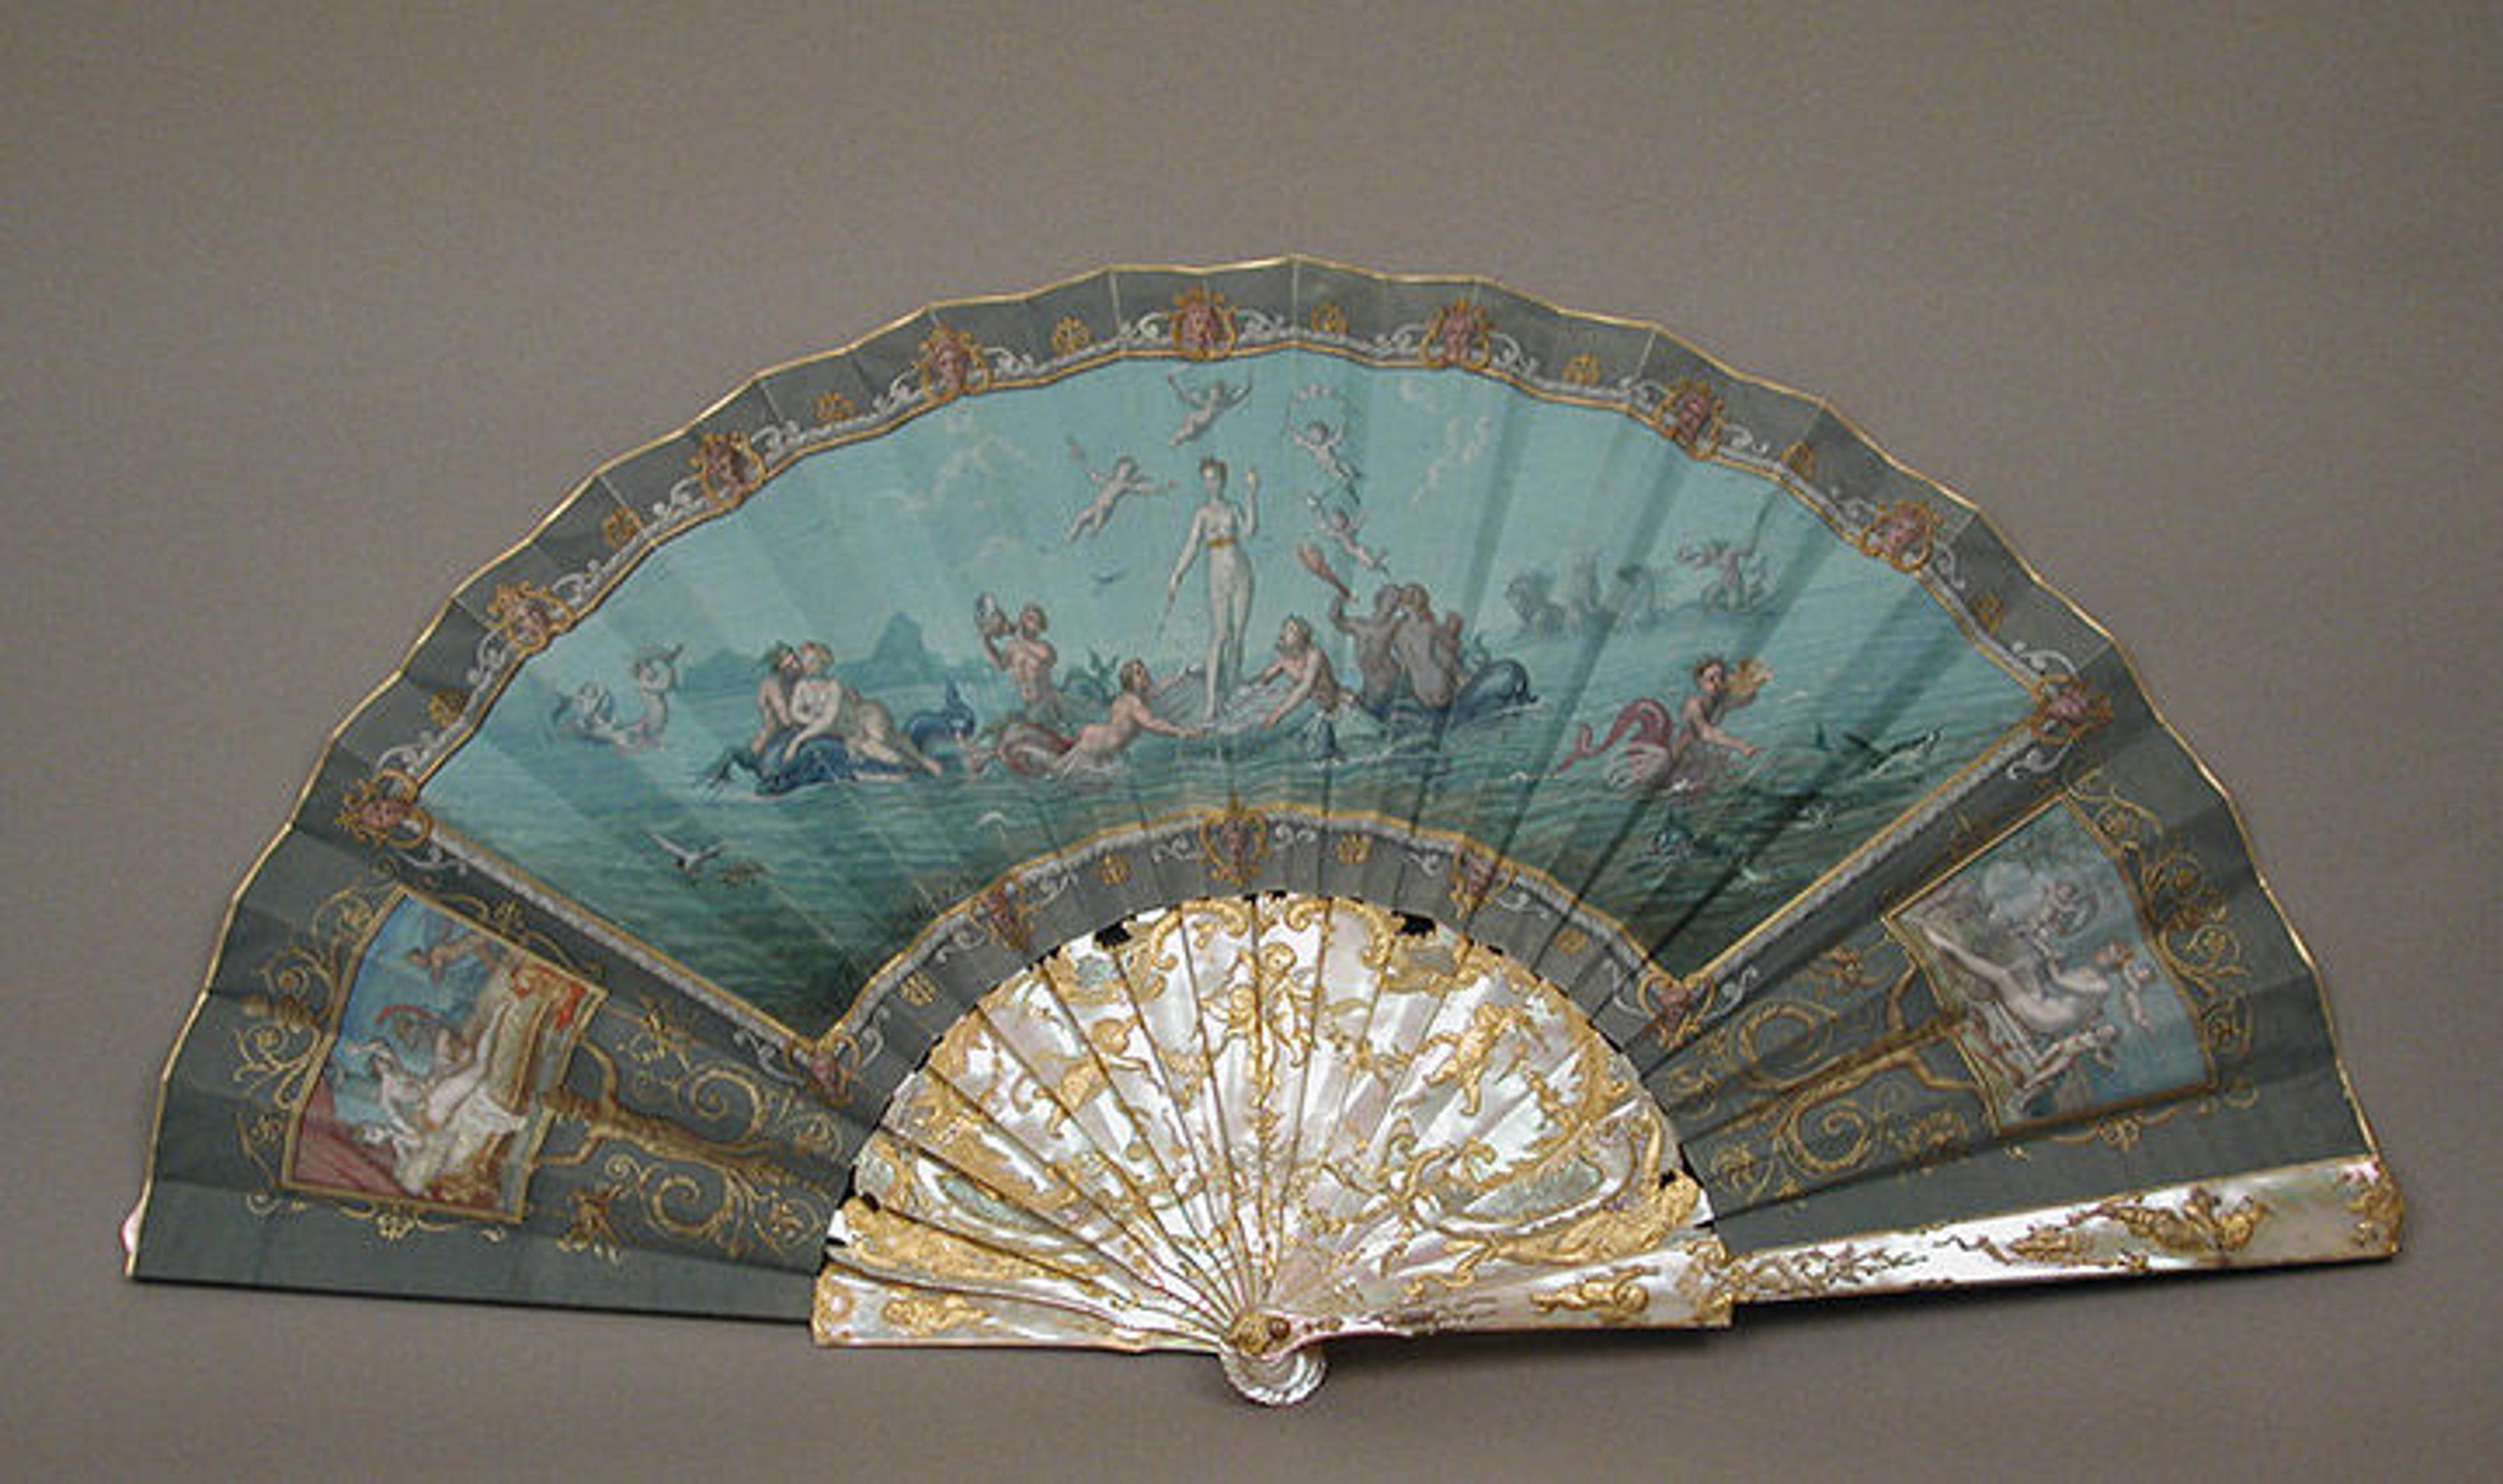 Turquoise fan depicting Venus on a half-shell in the ocean with Cupids